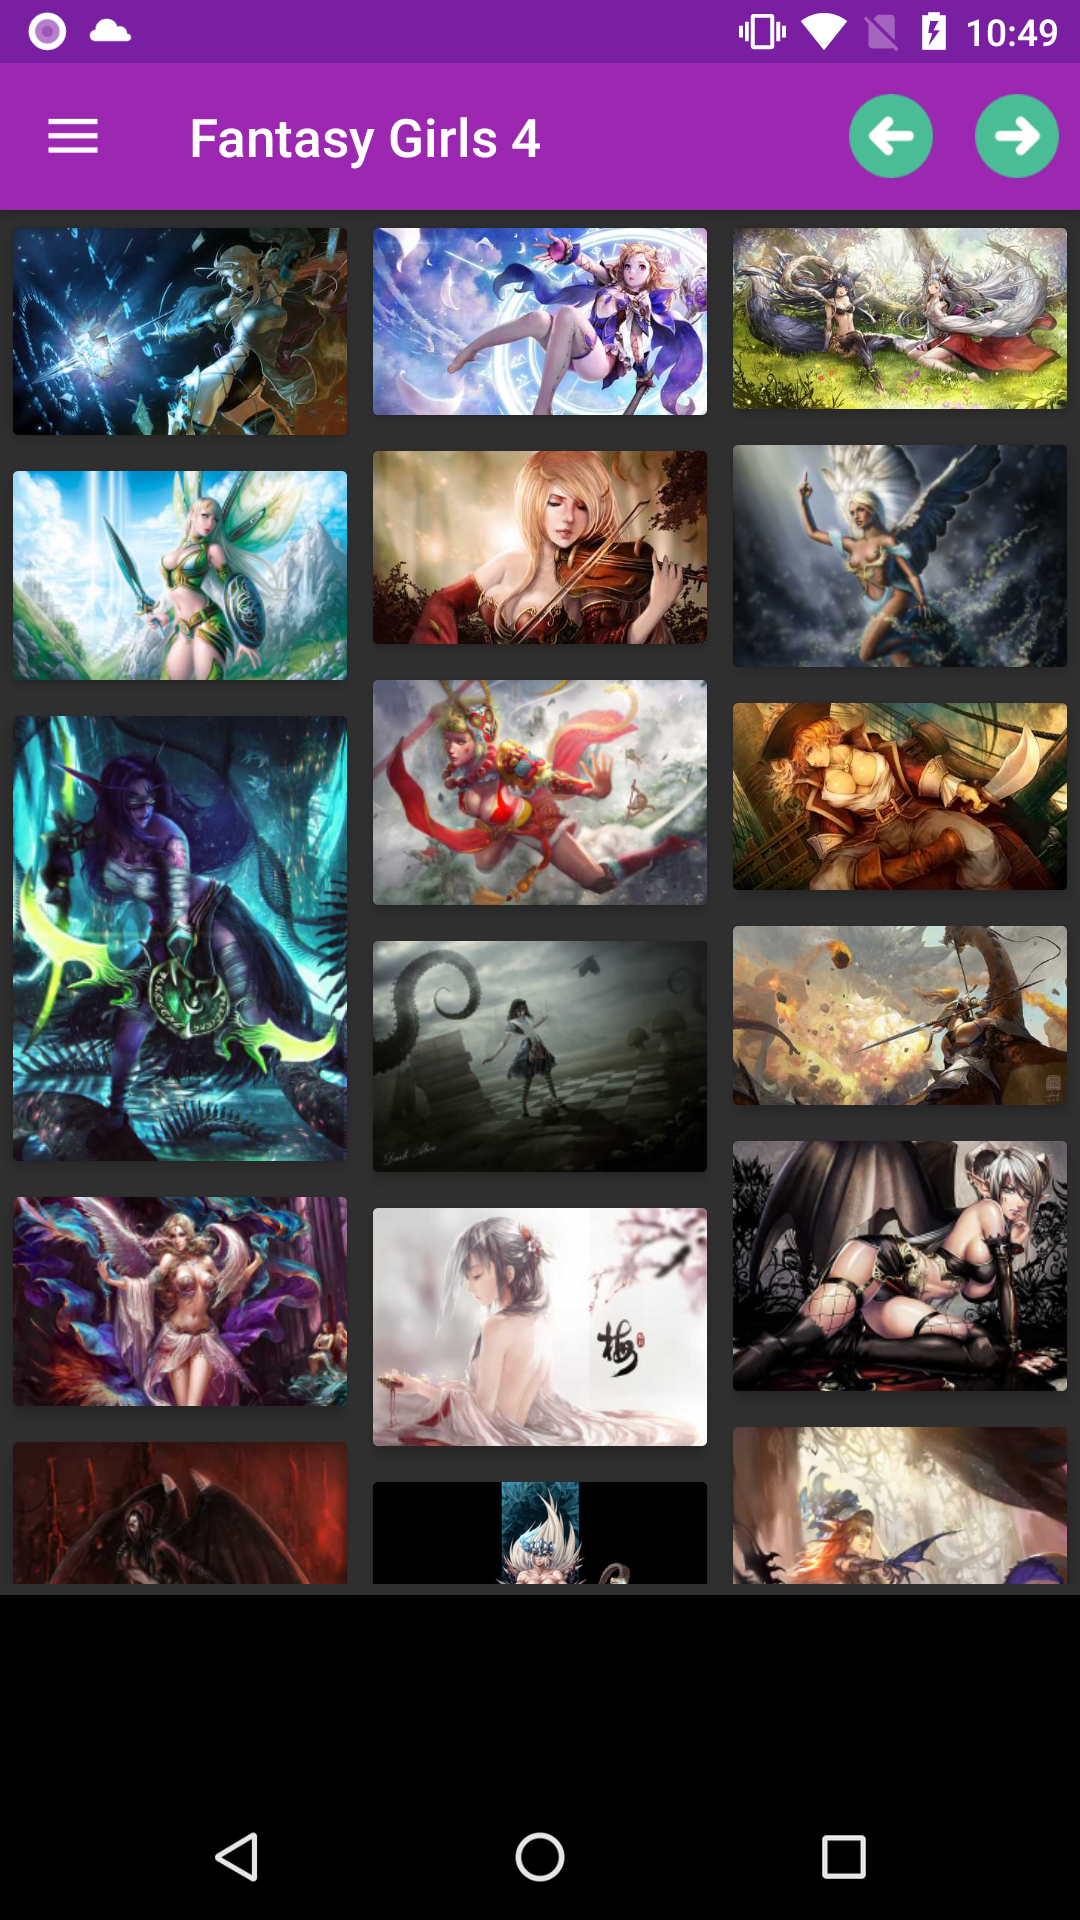 Fantasy Girls wallpapers backgrounds,galleries,application,anime,photo,images,gomez,erotic,star,esperanza,fantasy,best,pegging,pic,adult,porn,blowbang,app,collections,apps,girls,sexy,pics,for,wallpapers,hentai